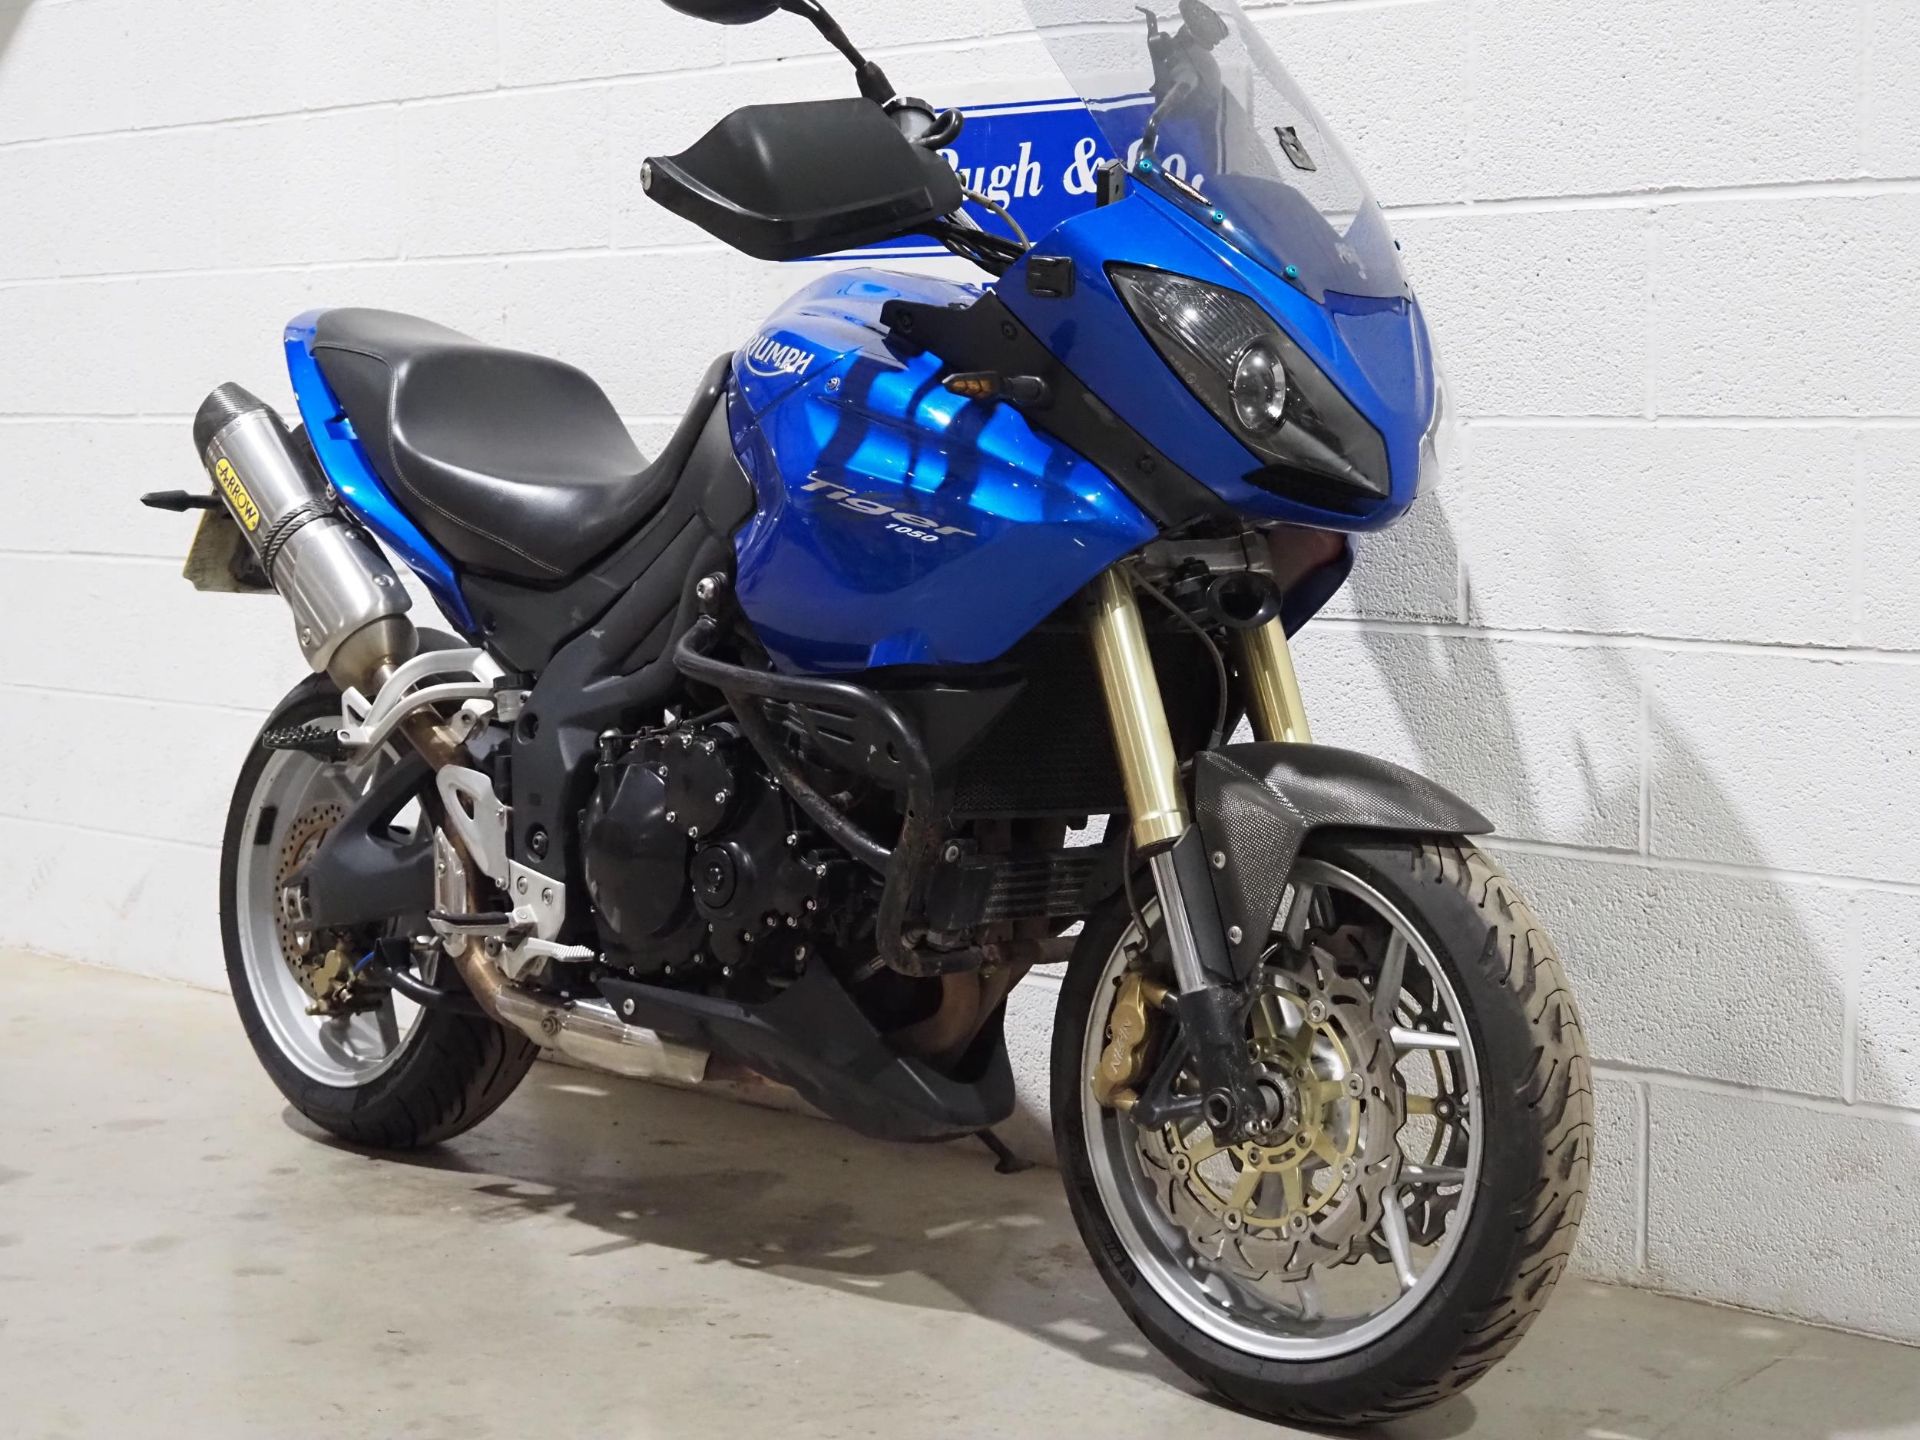 Triumph Tiger 1050 motorcycle. 2007. 1050cc. Non runner but engine turns over. Cat C in 2015. - Image 2 of 6